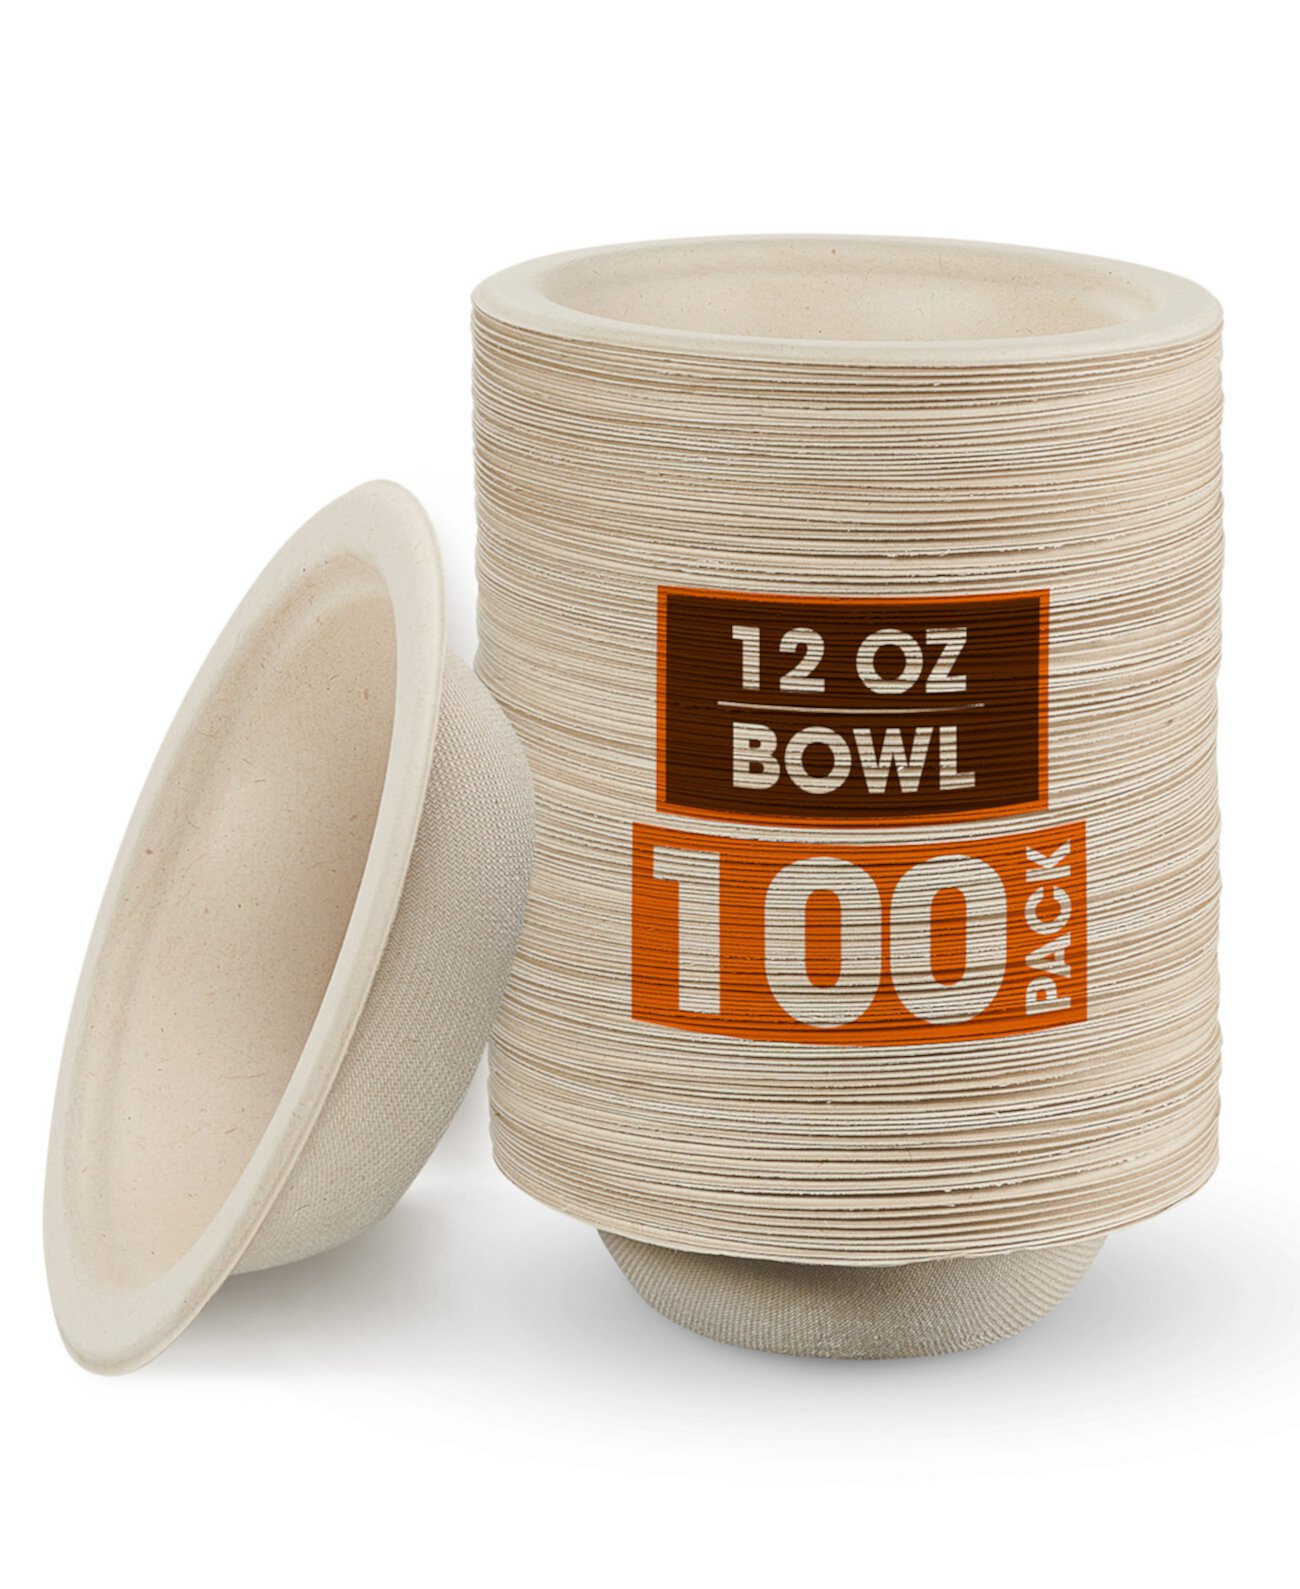 12 oz Paper Bowls, 100 Pack Cheer Collection